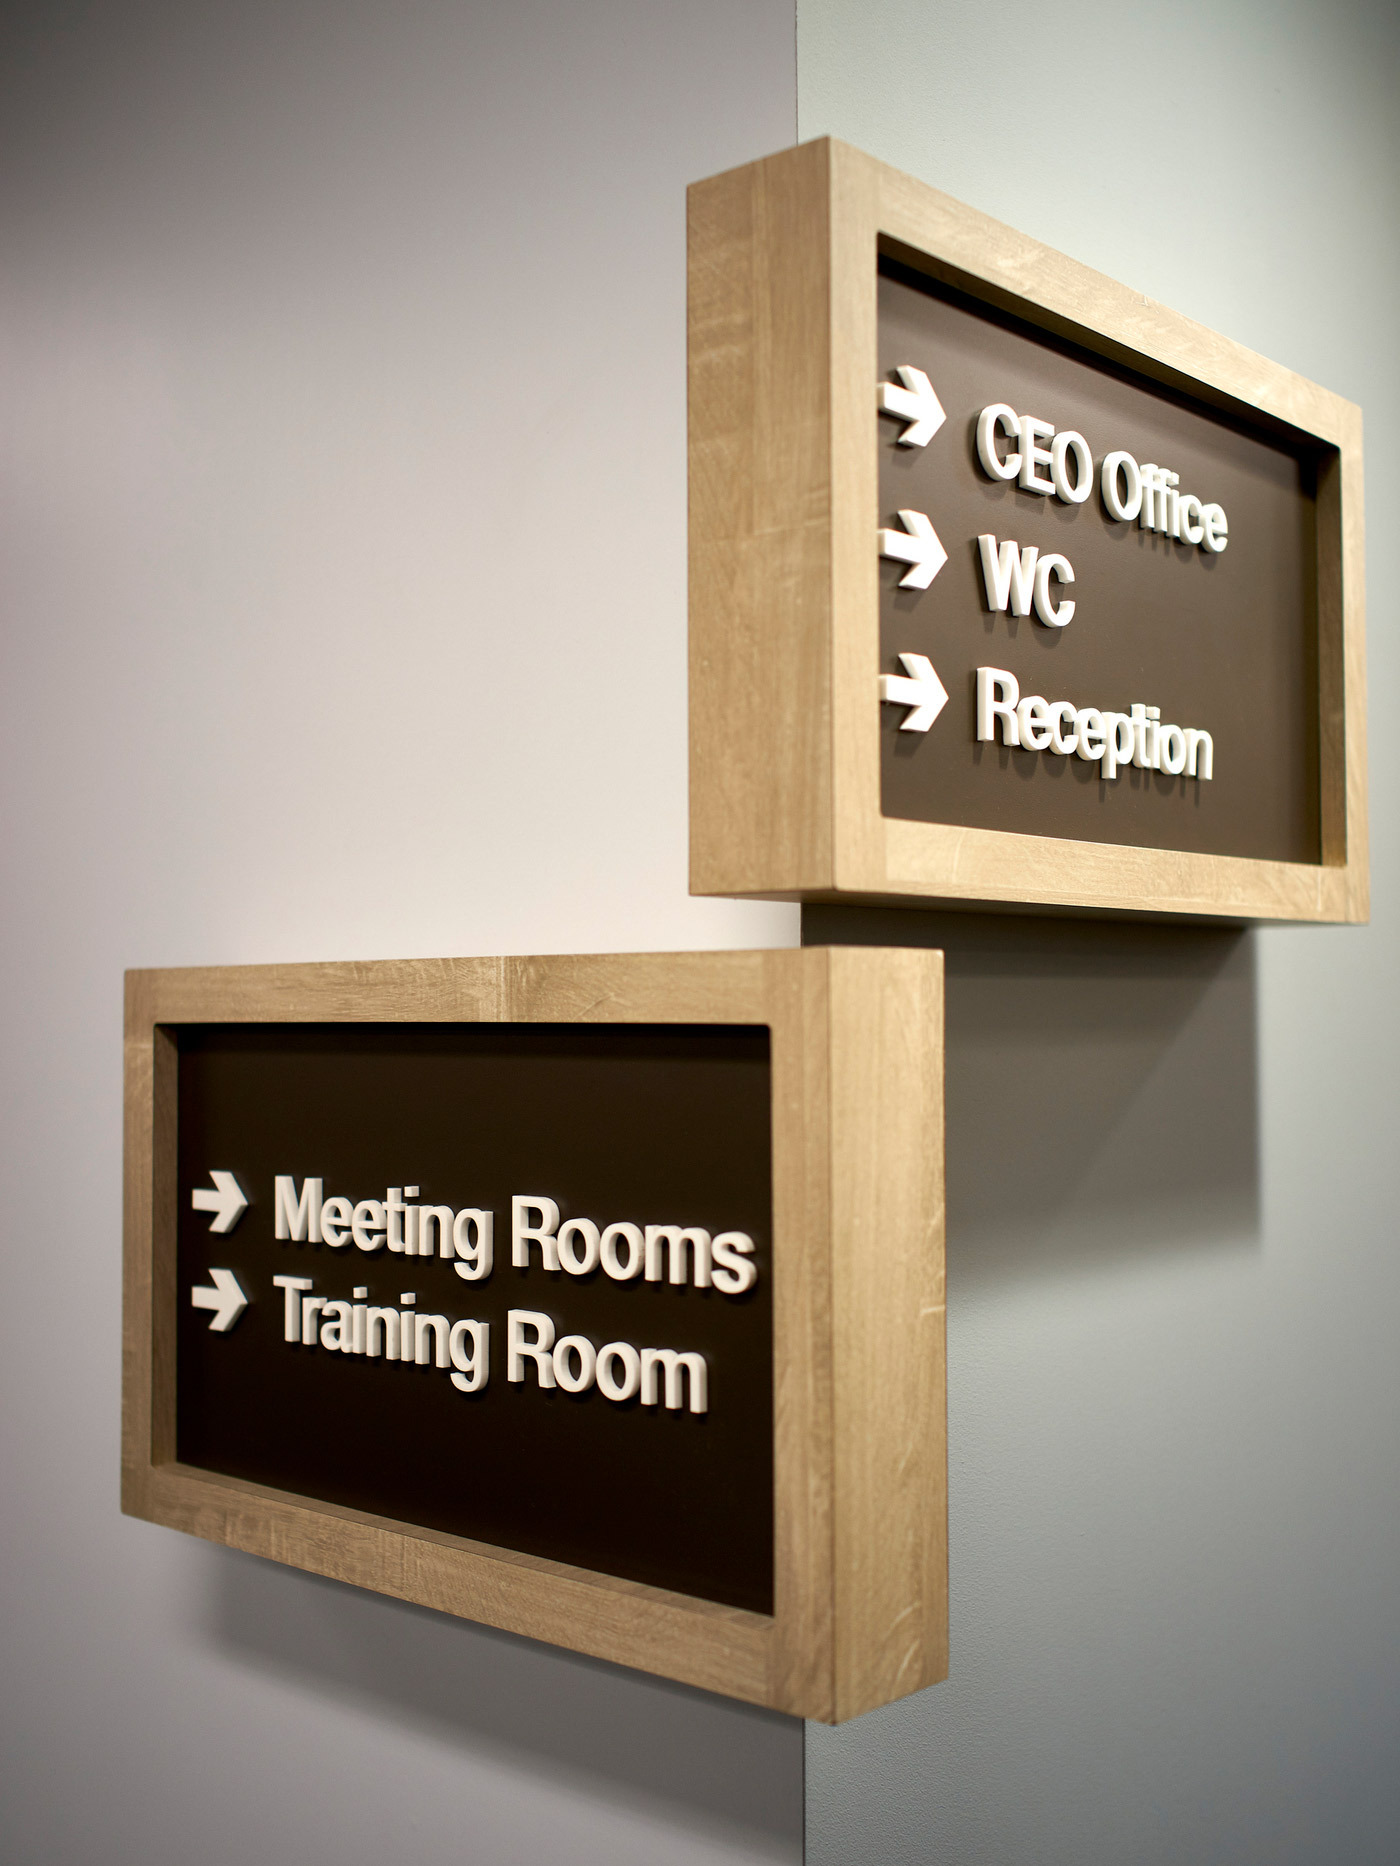 Wall-mounted wooden signage featuring backlit frosted glass panels displays directional information for a CEO office, WC, Reception, Meeting Rooms, and Training Room, with white arrow symbols and text.